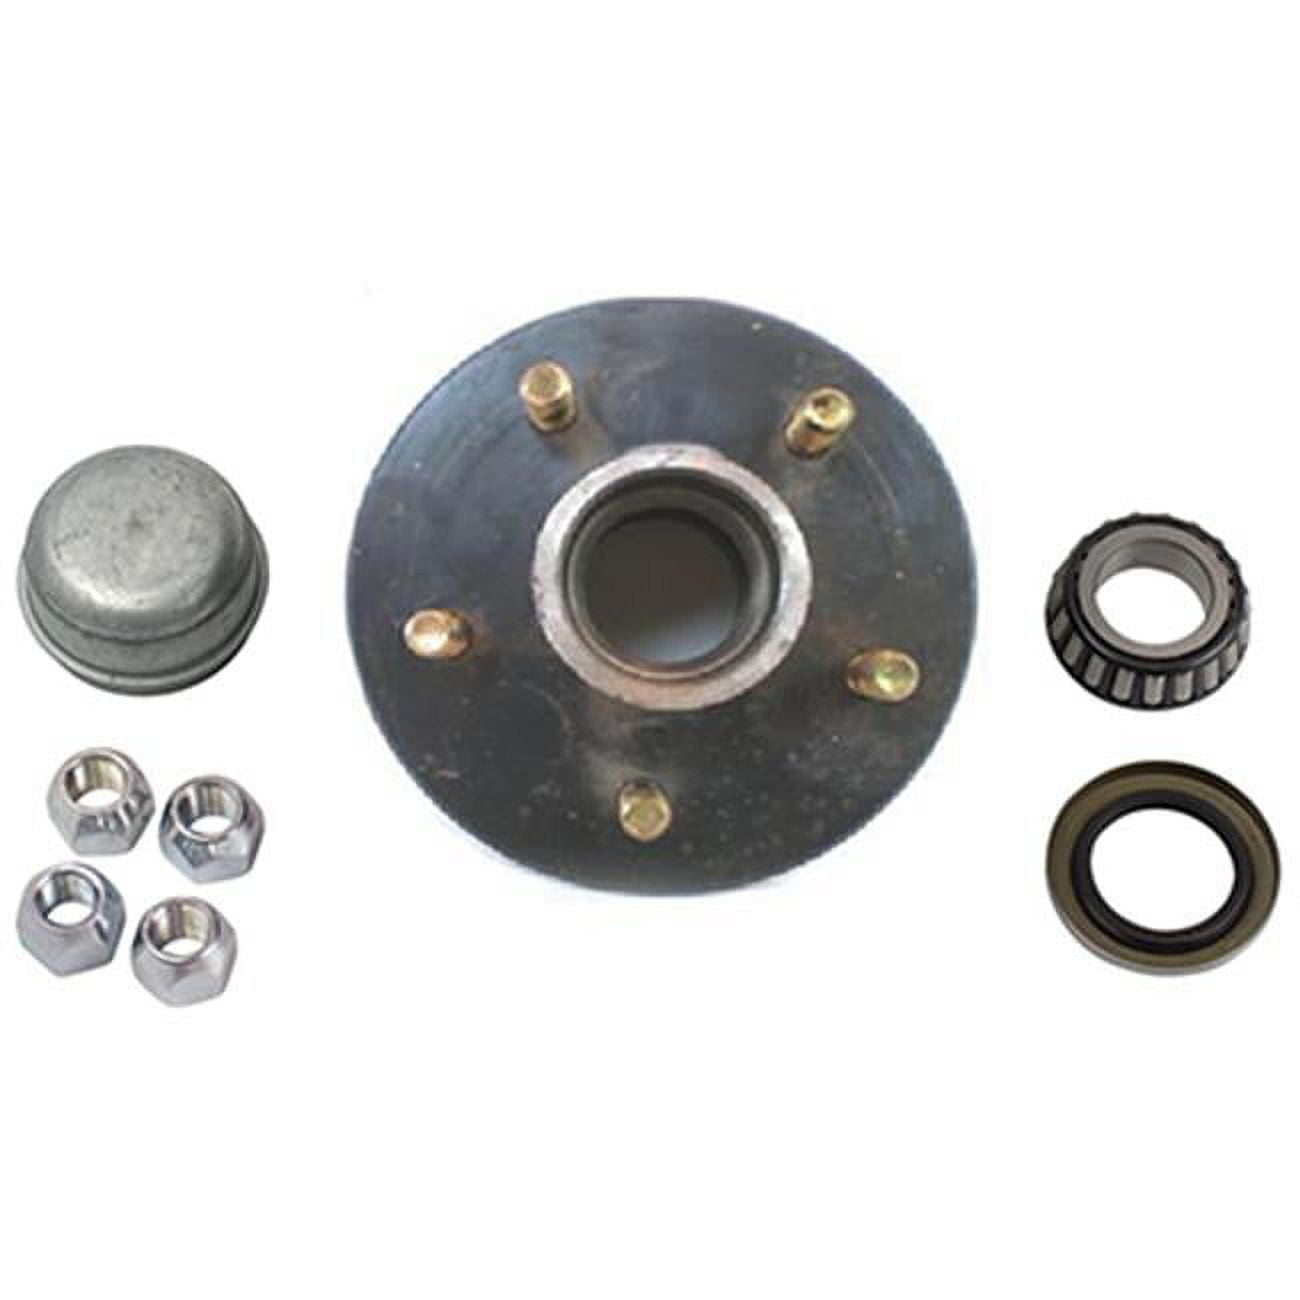 The ROP Shop  Trailer Axle Kit Assembly W/ 4 on 4 Bolt Idler Hub